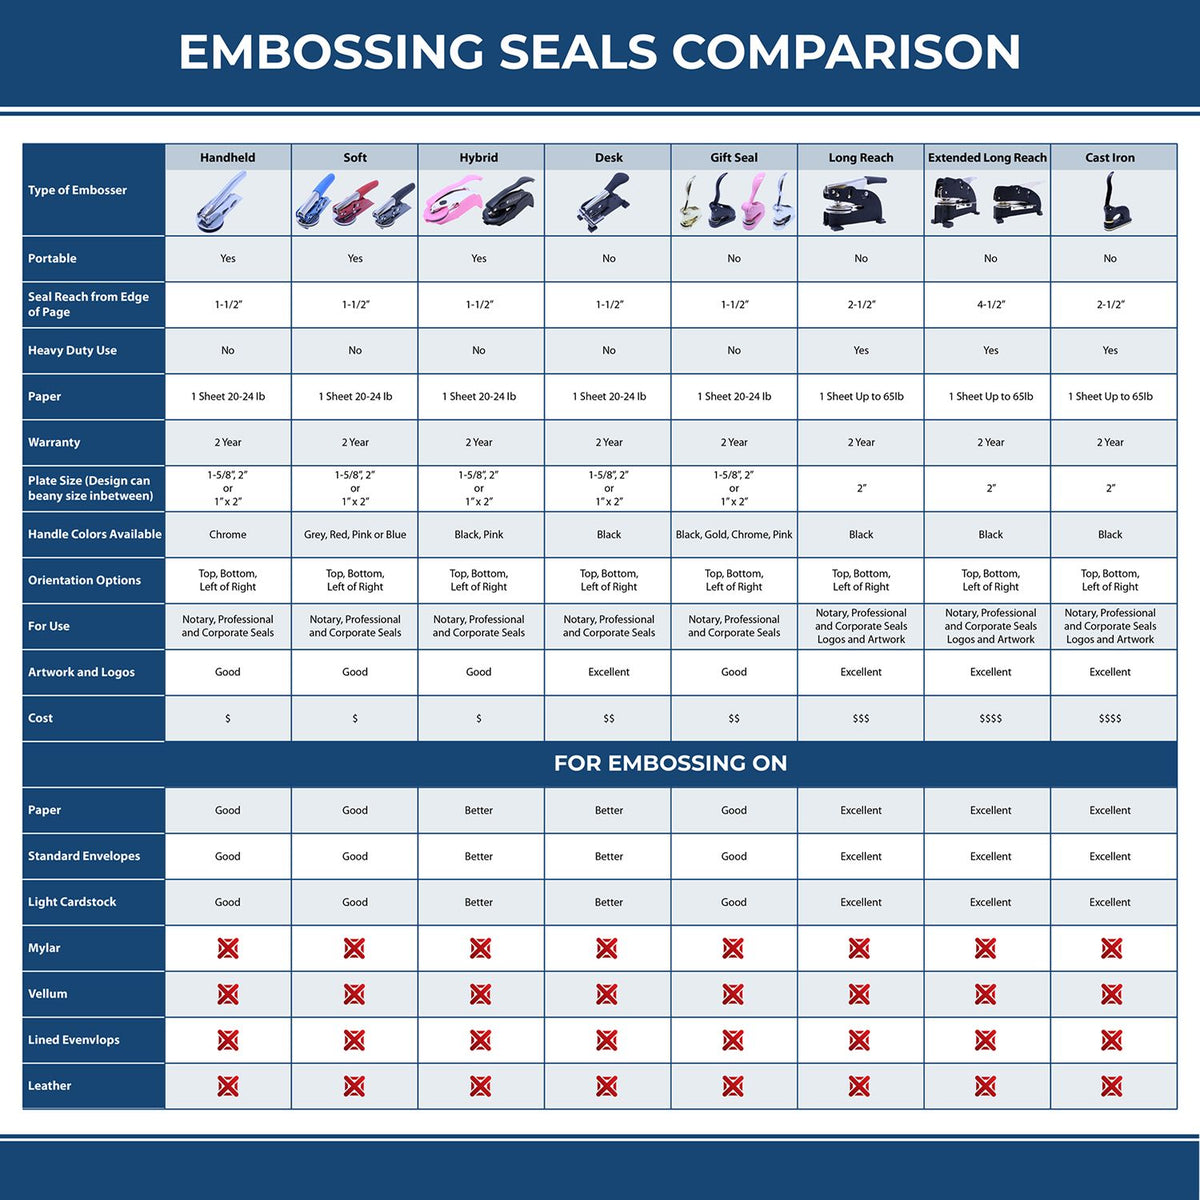 A comparison chart for the different types of mount models available for the Extended Long Reach Georgia Surveyor Embosser.